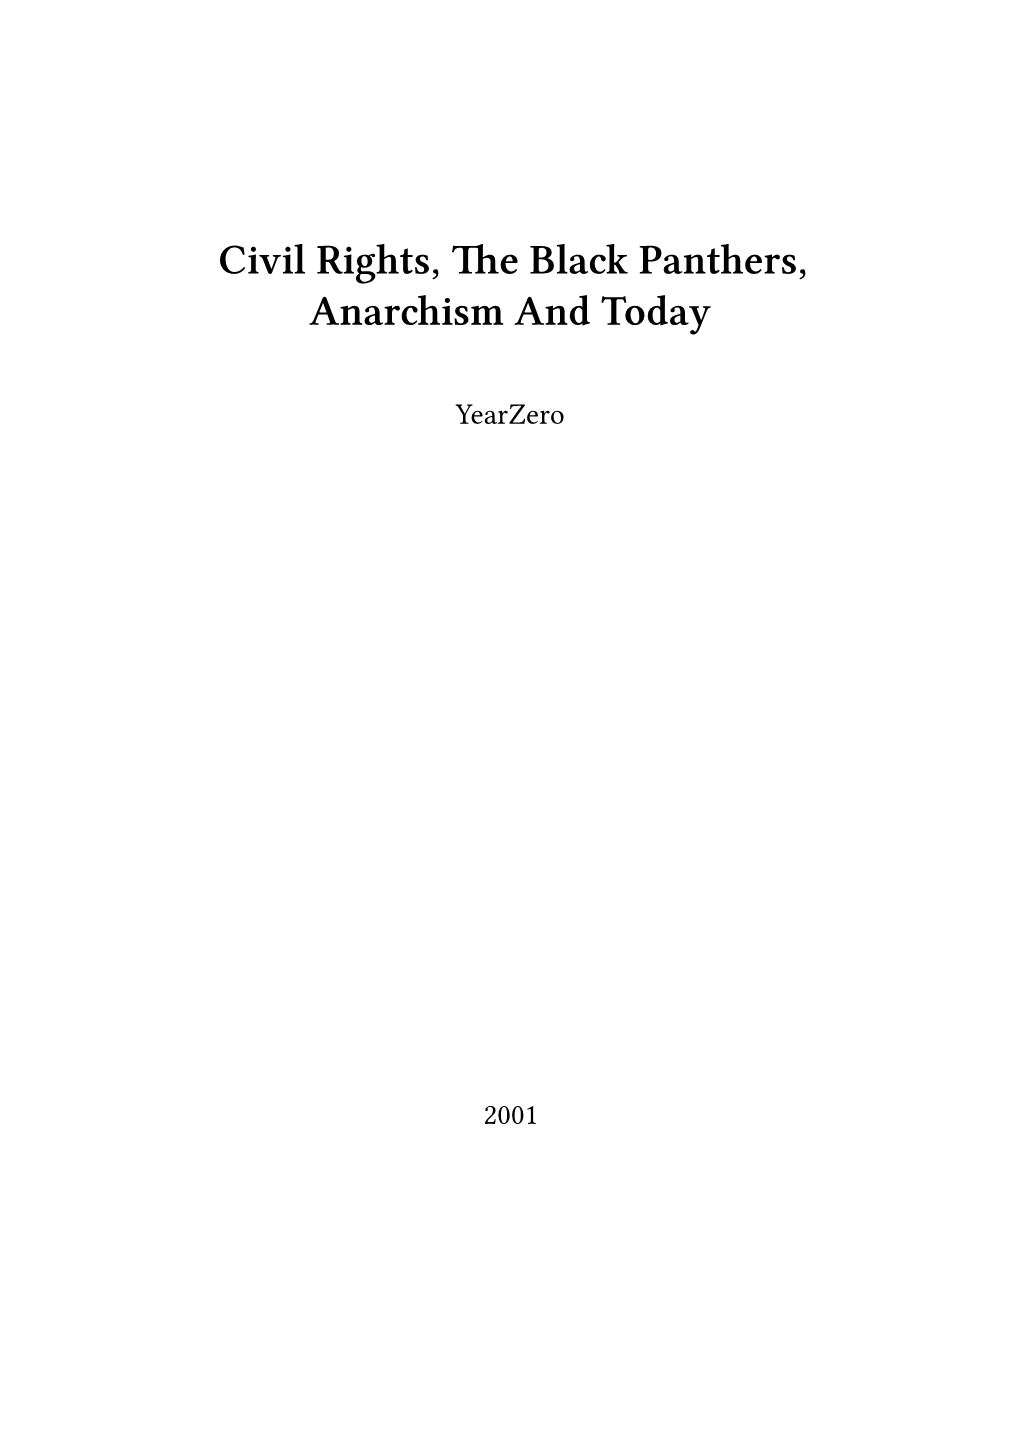 Civil Rights, the Black Panthers, Anarchism and Today